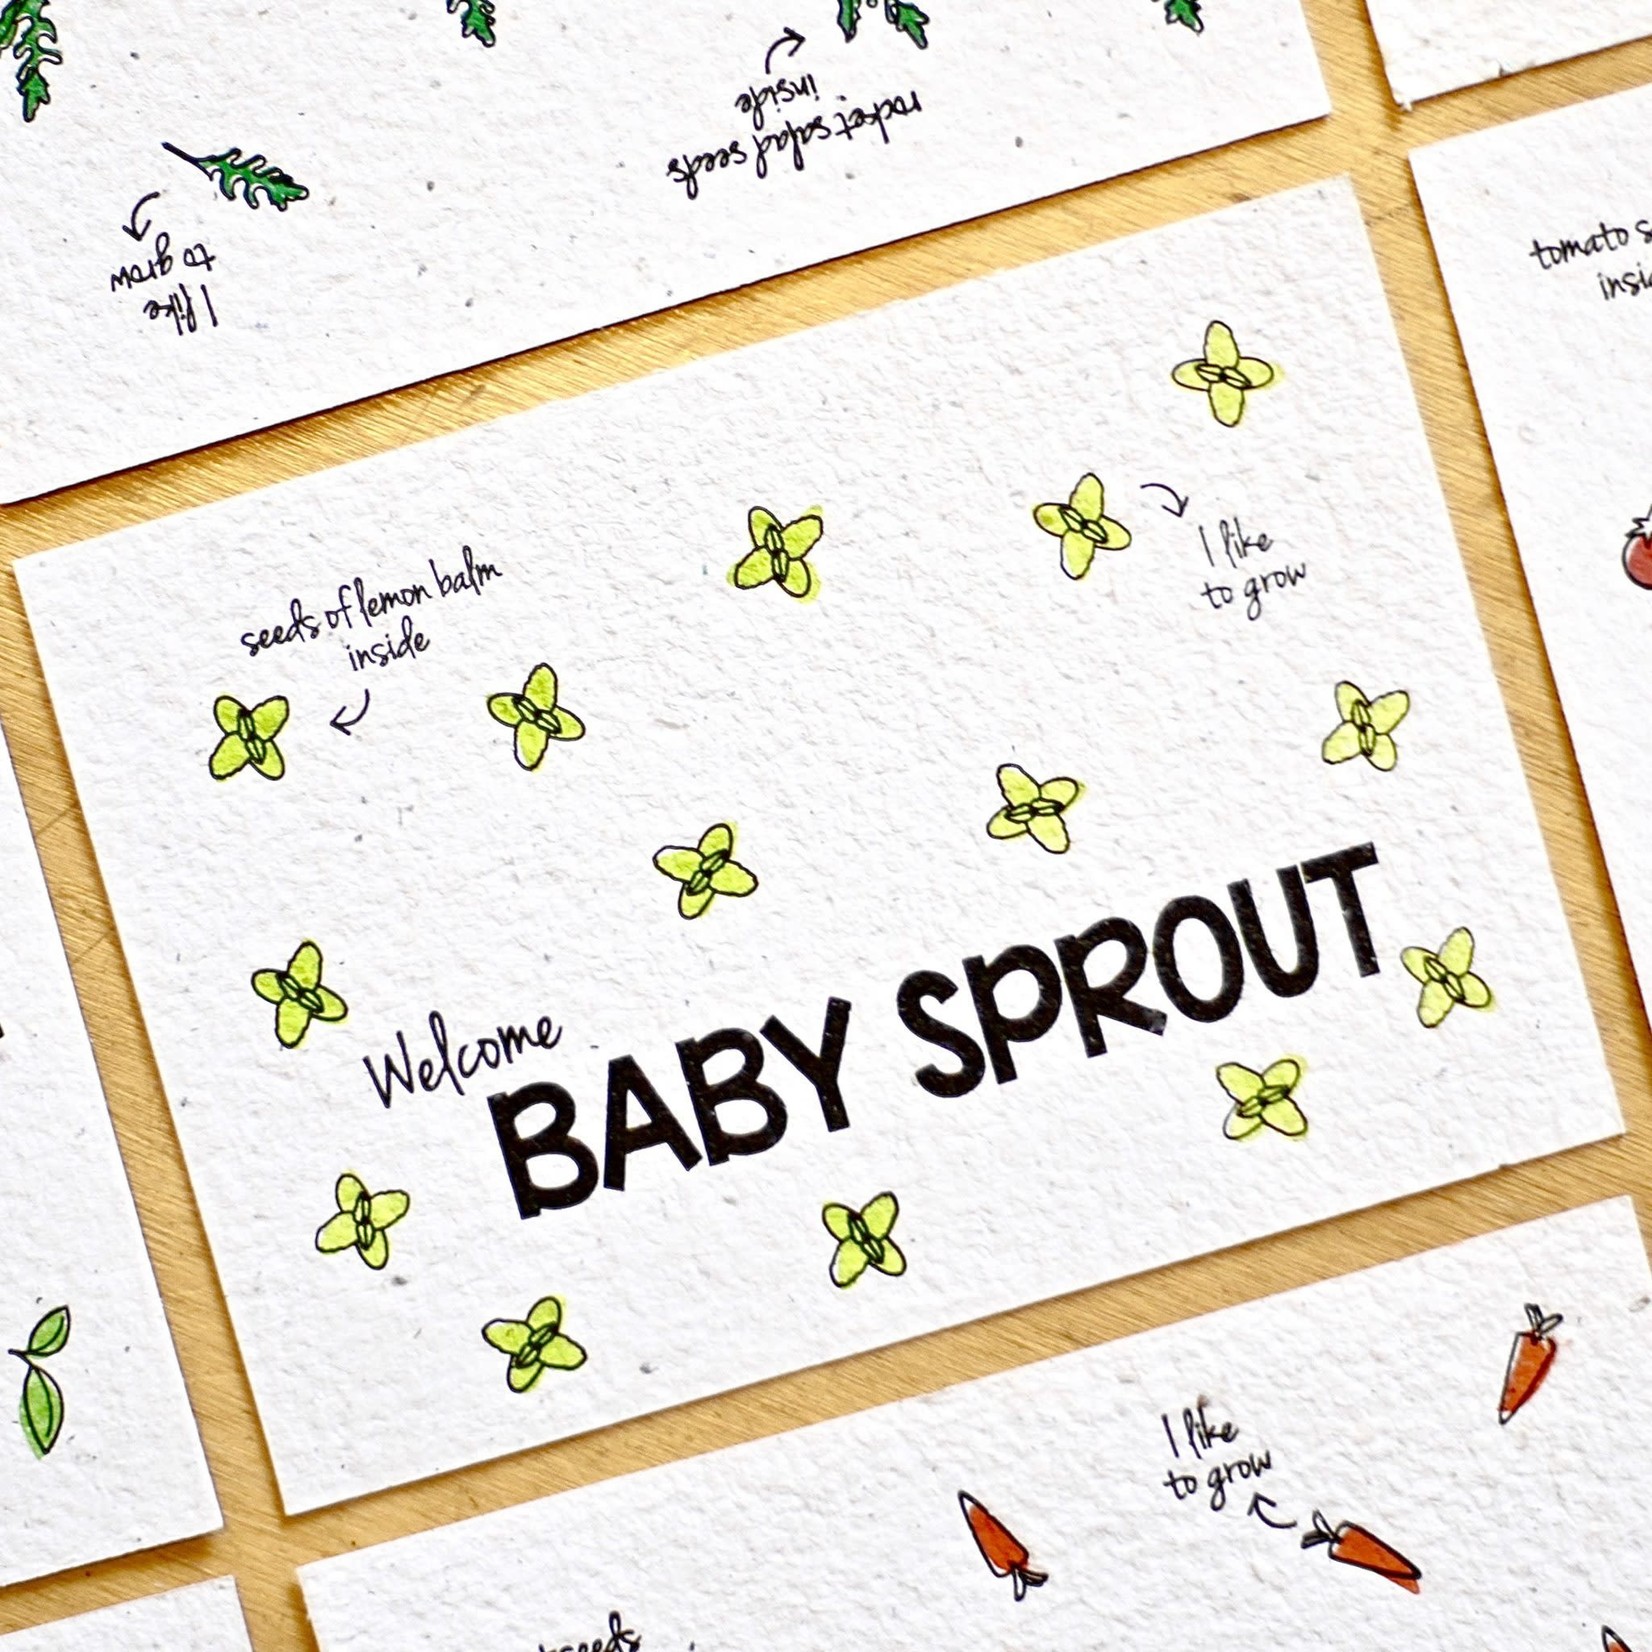 BLOOM Your Message Bloeikaart “Baby Sprout”